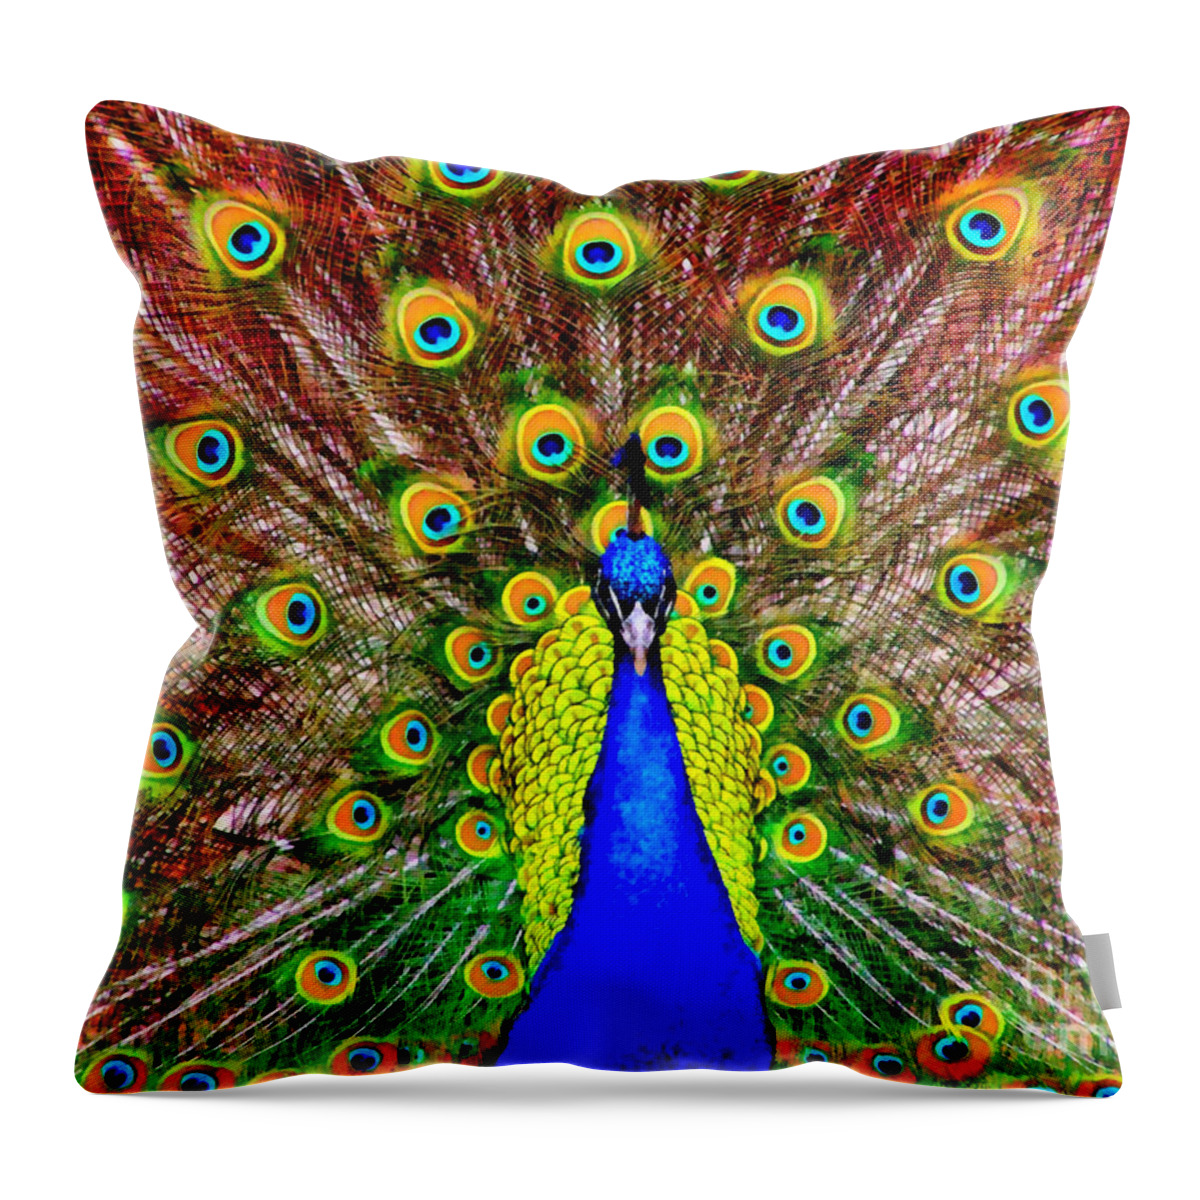 Zoo Throw Pillow featuring the painting Proud by Vincent Monozlay